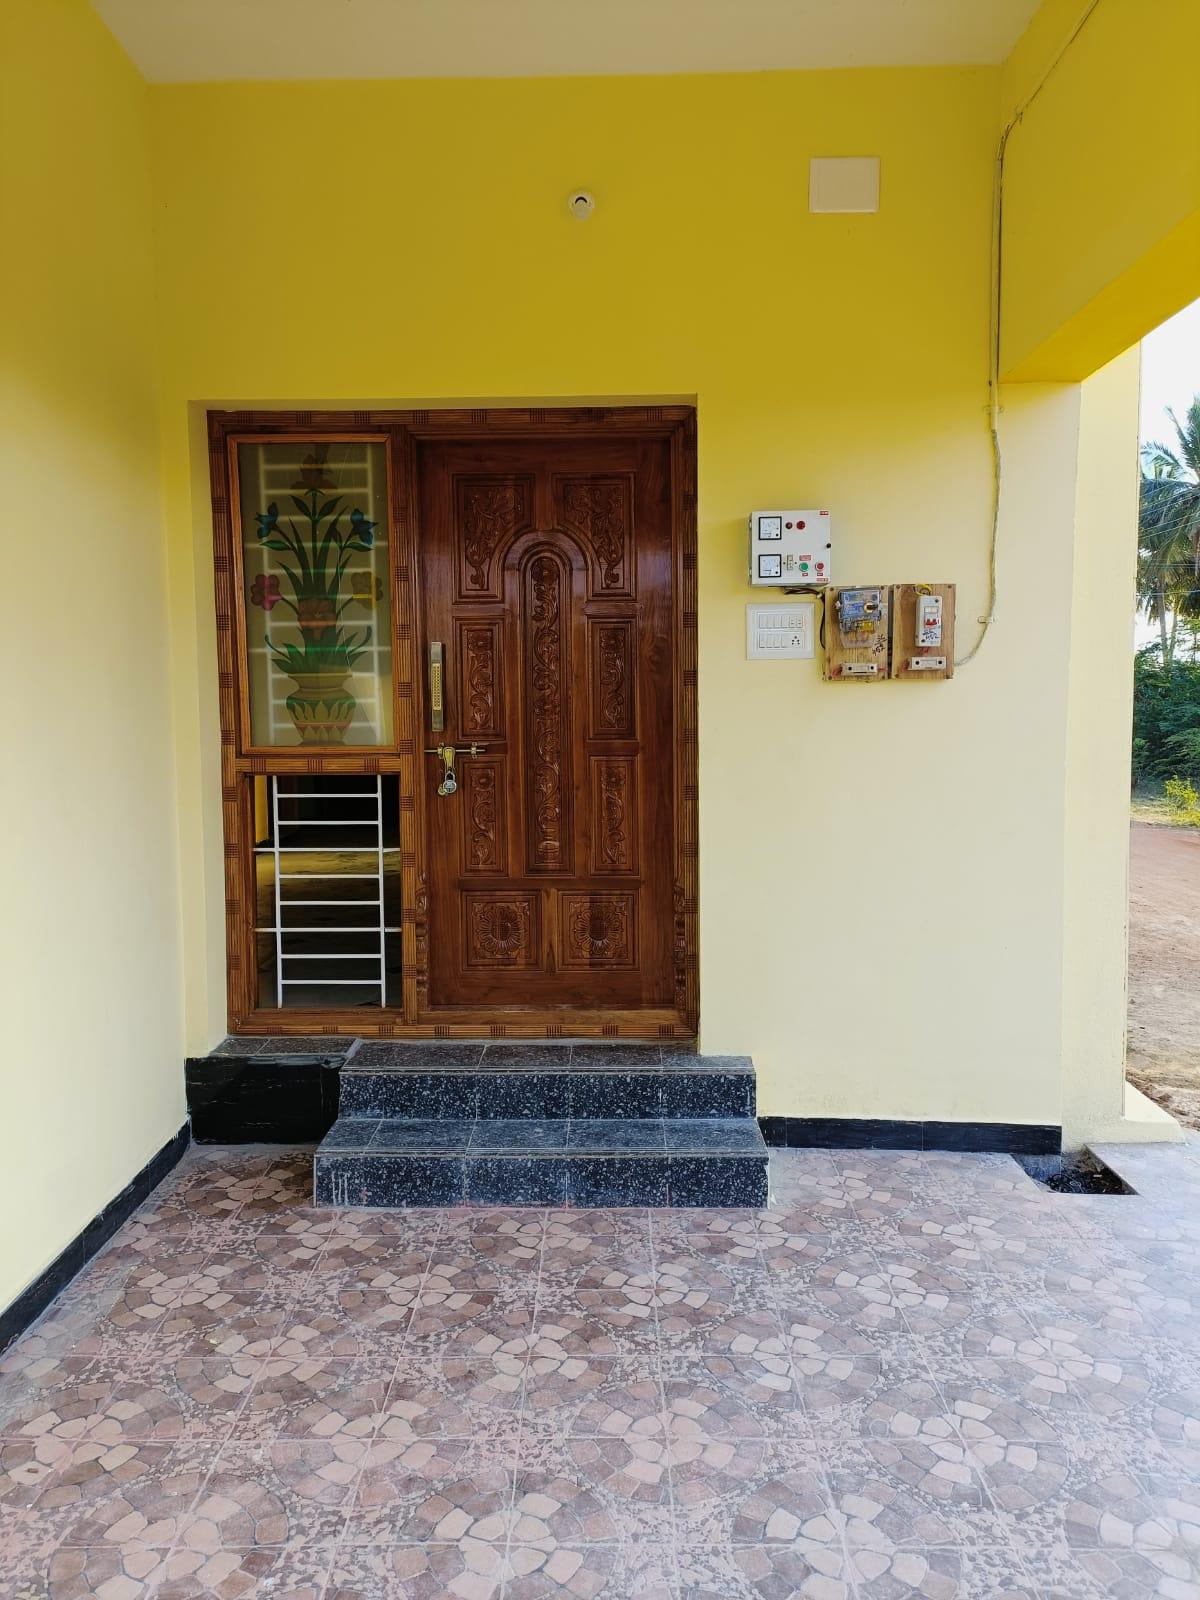 1 Bed/ 2 Bath Rent House/ Bungalow/ Villa; 650 sq. ft. carpet area, UnFurnished for rent @Chettiyapatti